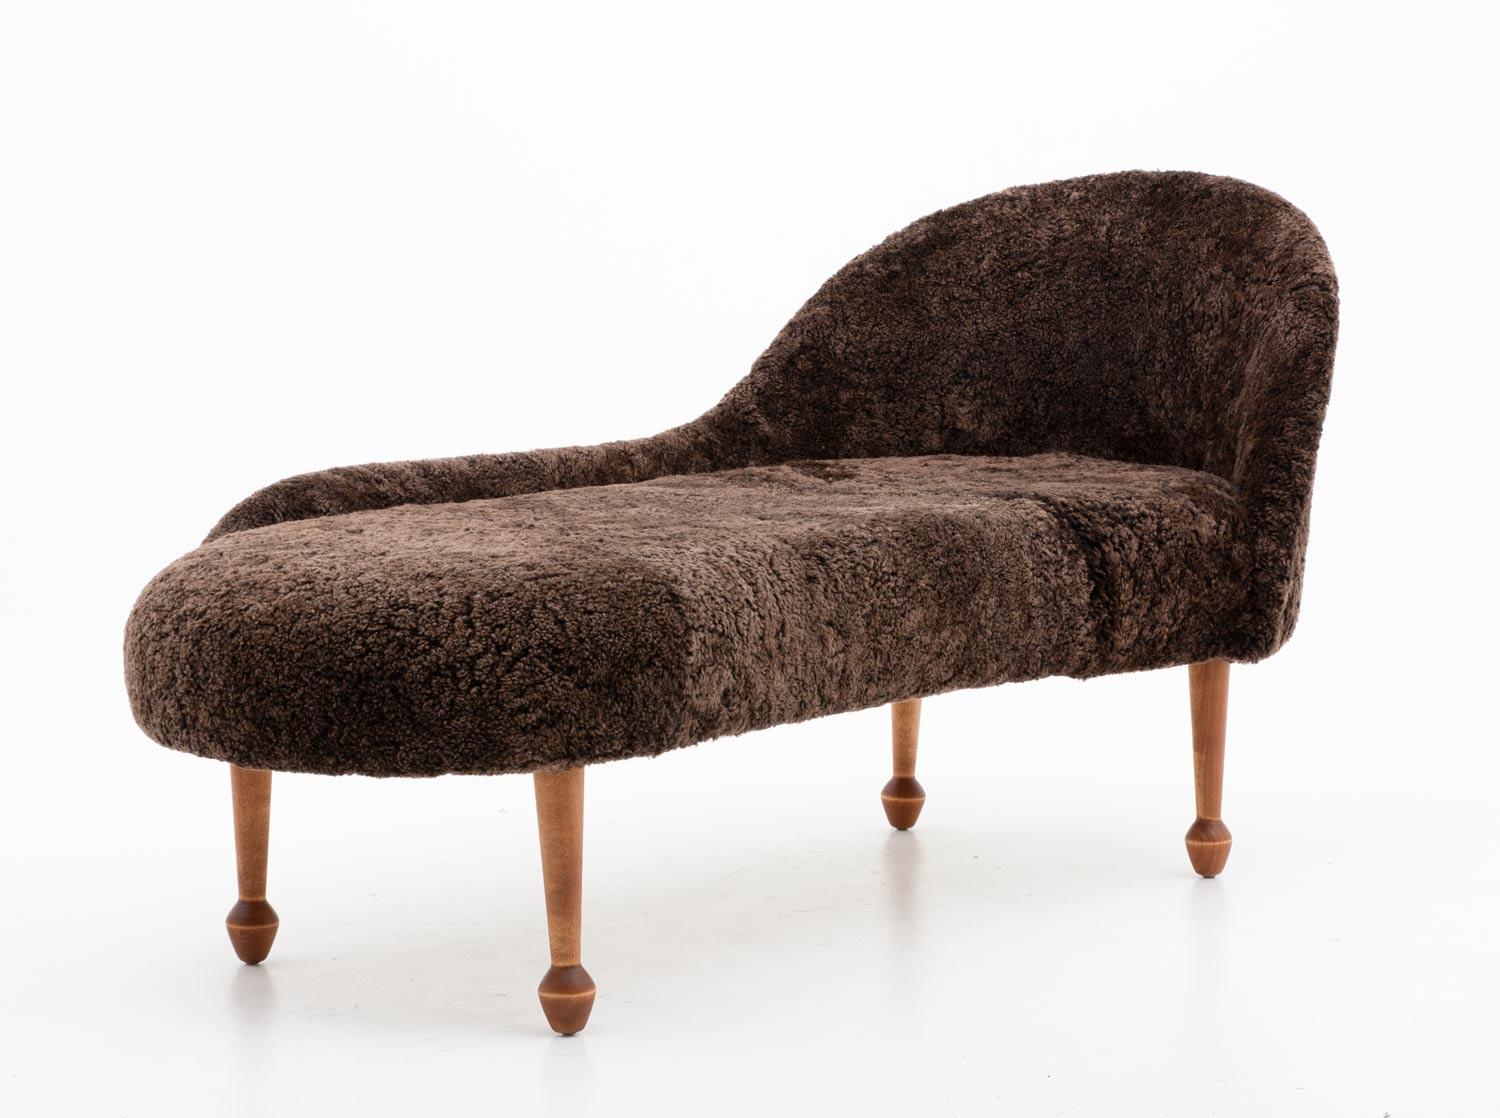 Swedish midcentury chaise longue in sheepskin, manufactured in Sweden, 1950s.
This chaise longue has a beautiful organic shape, supported by wooden drumstick legs. 

Condition: Completely restored and reupholstered in brown sheepskin by 1st